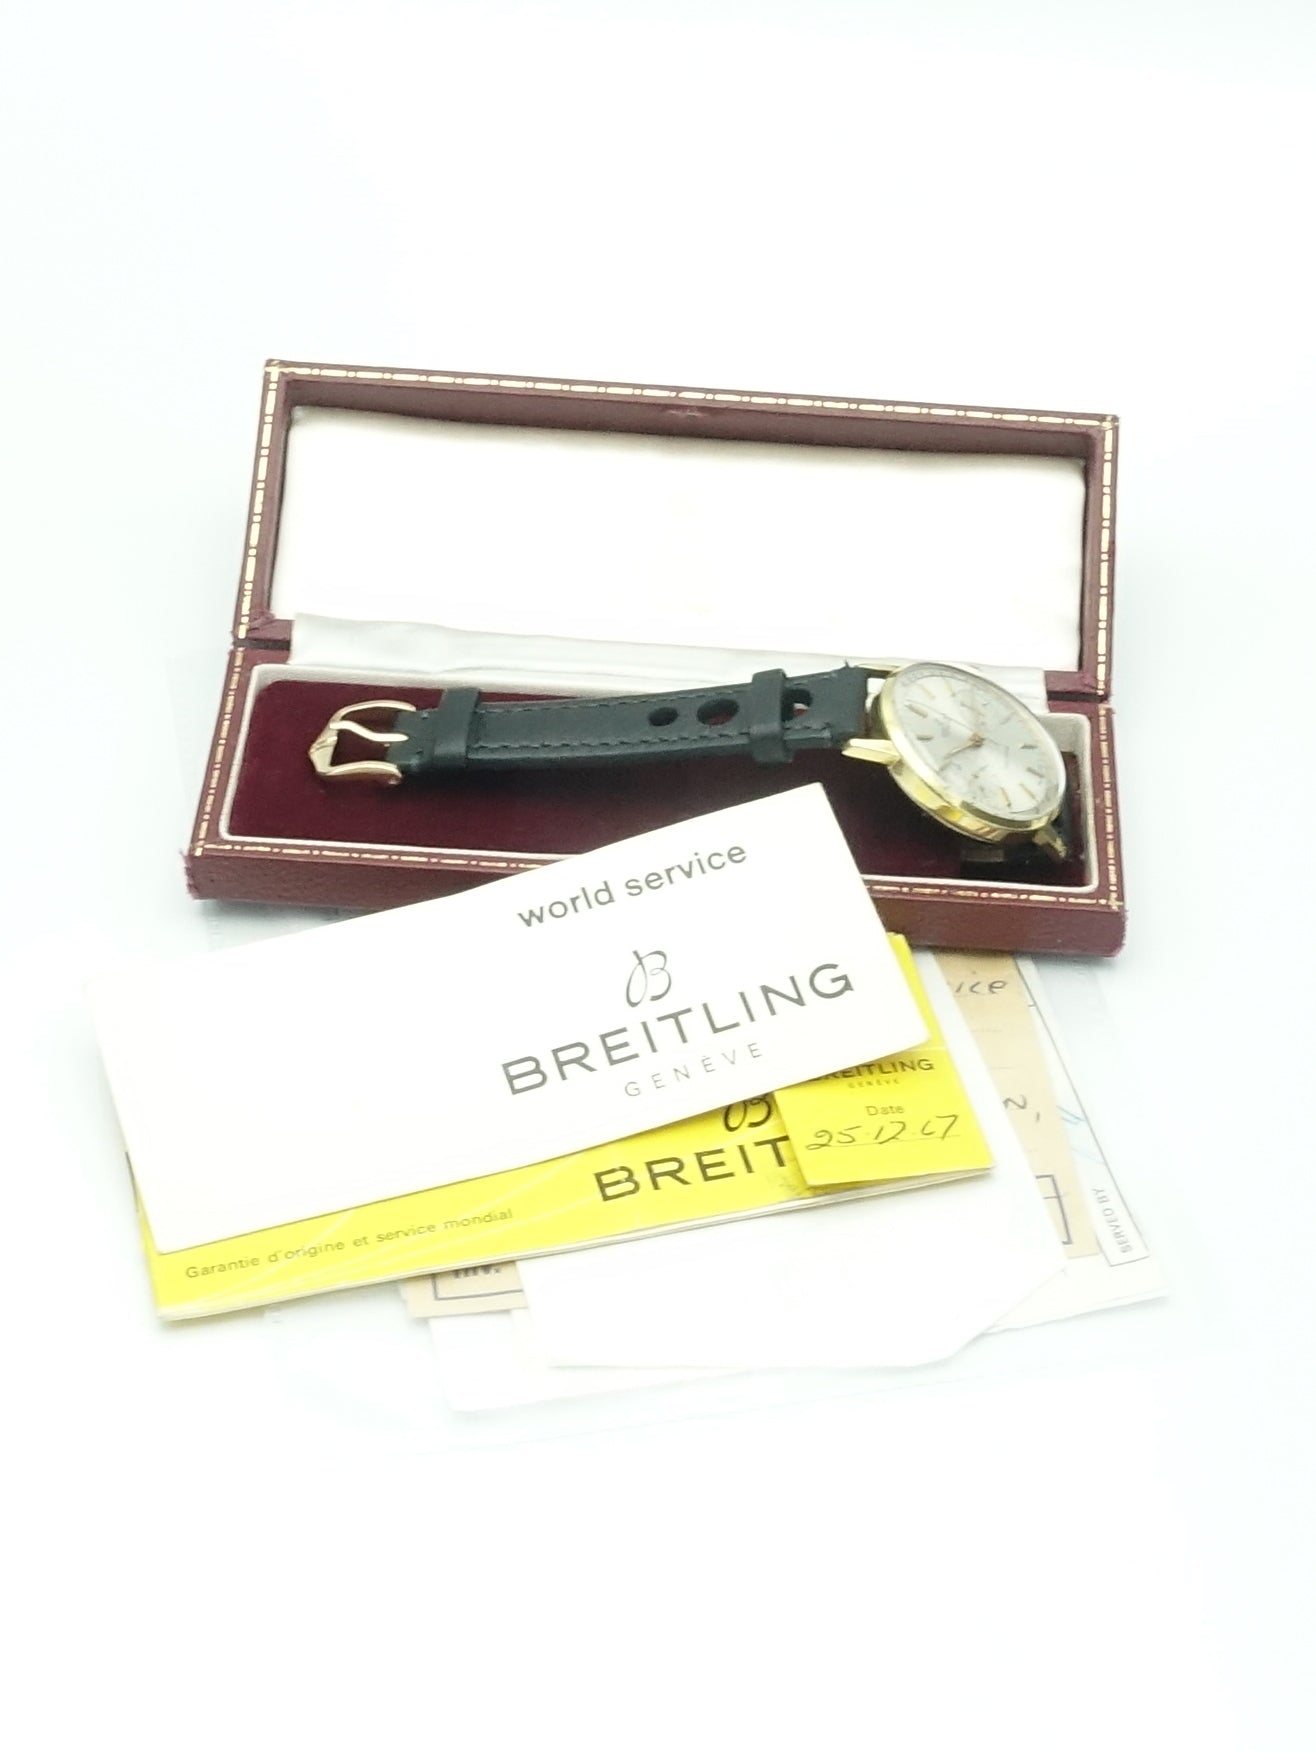 1966 Breitling Top Time Ref. 2003